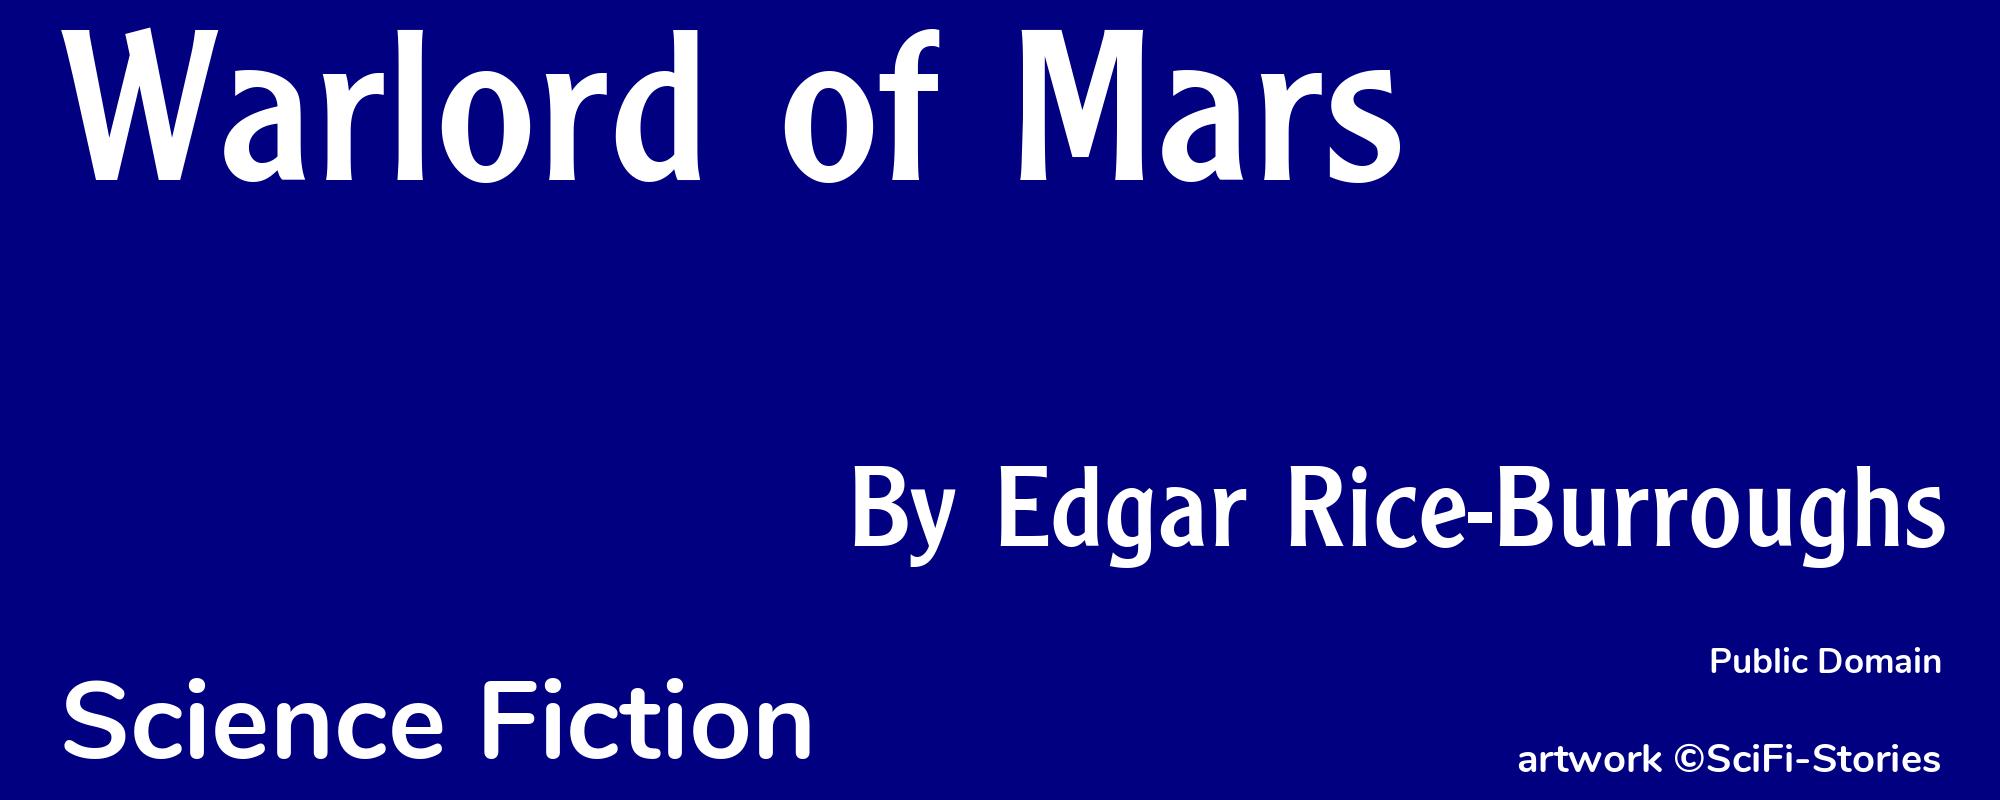 Warlord of Mars - Cover